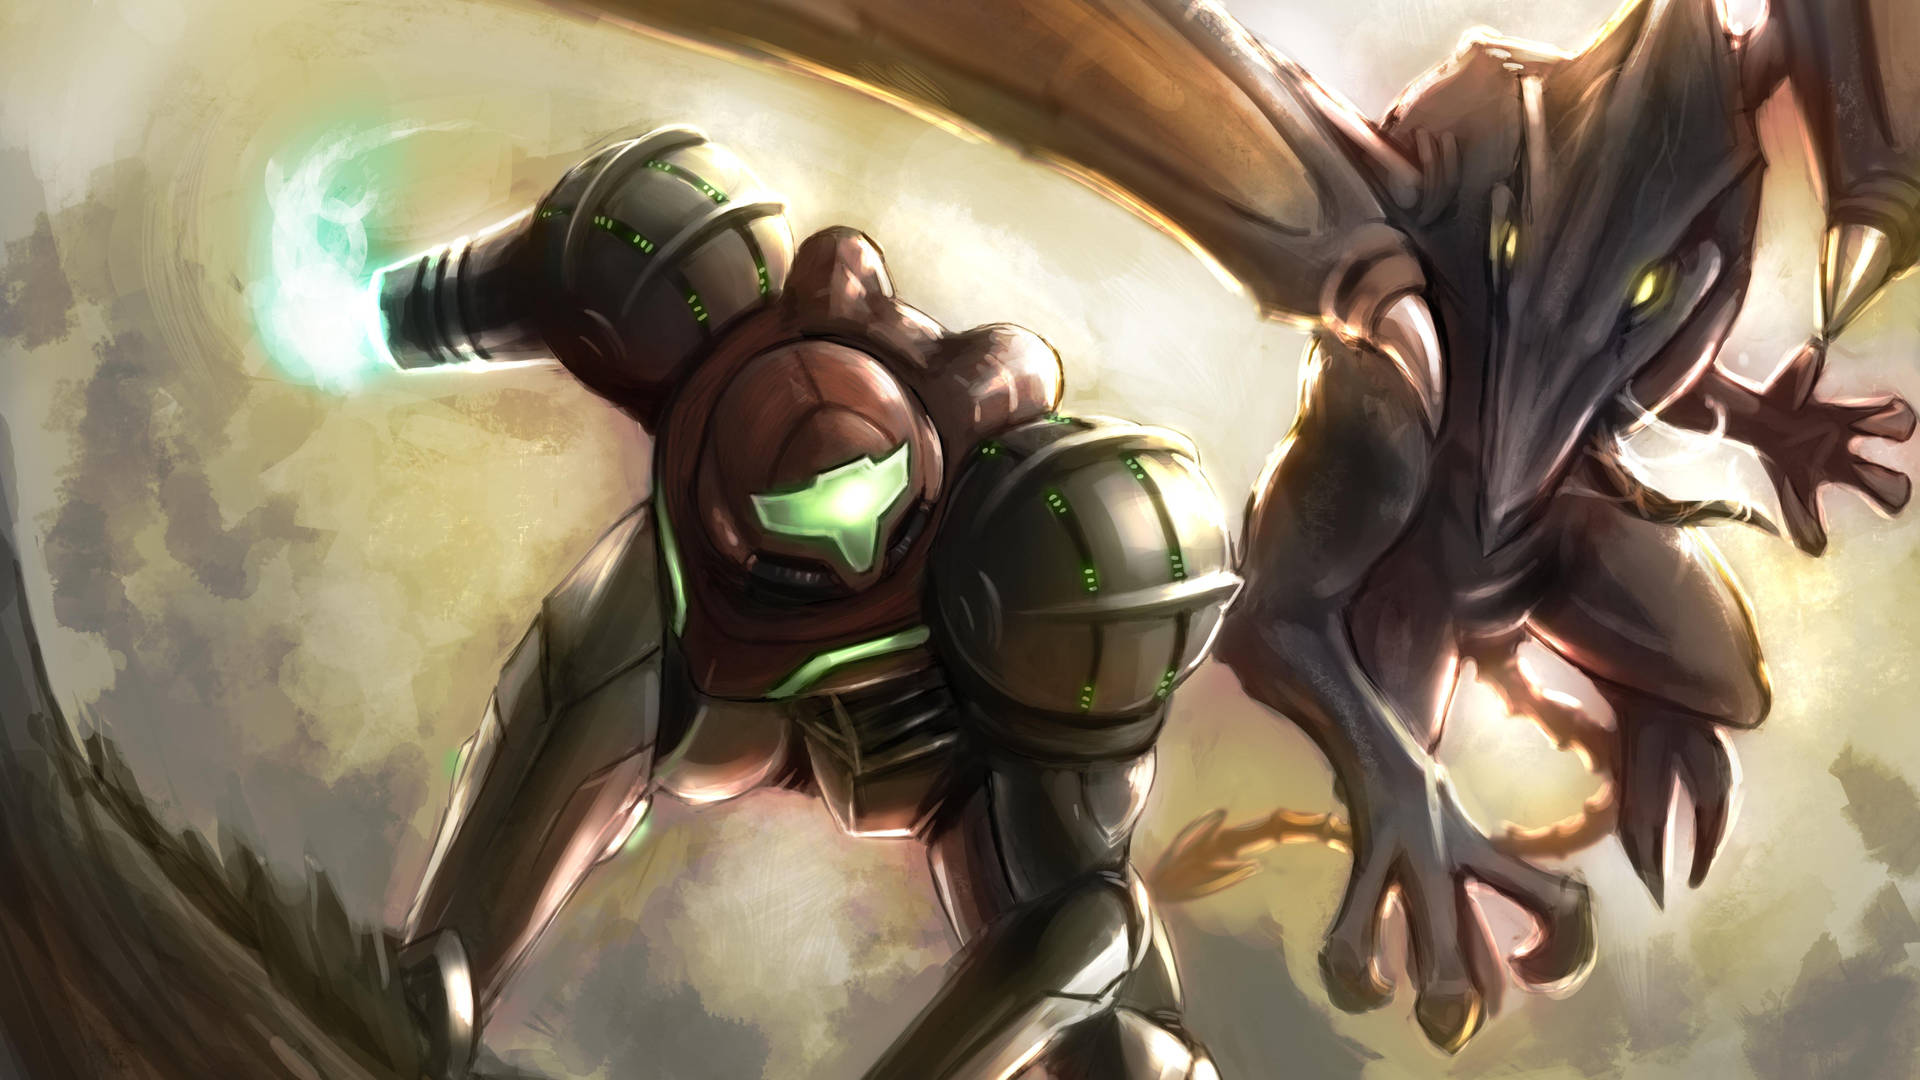 5906X3322 Metroid Wallpaper and Background